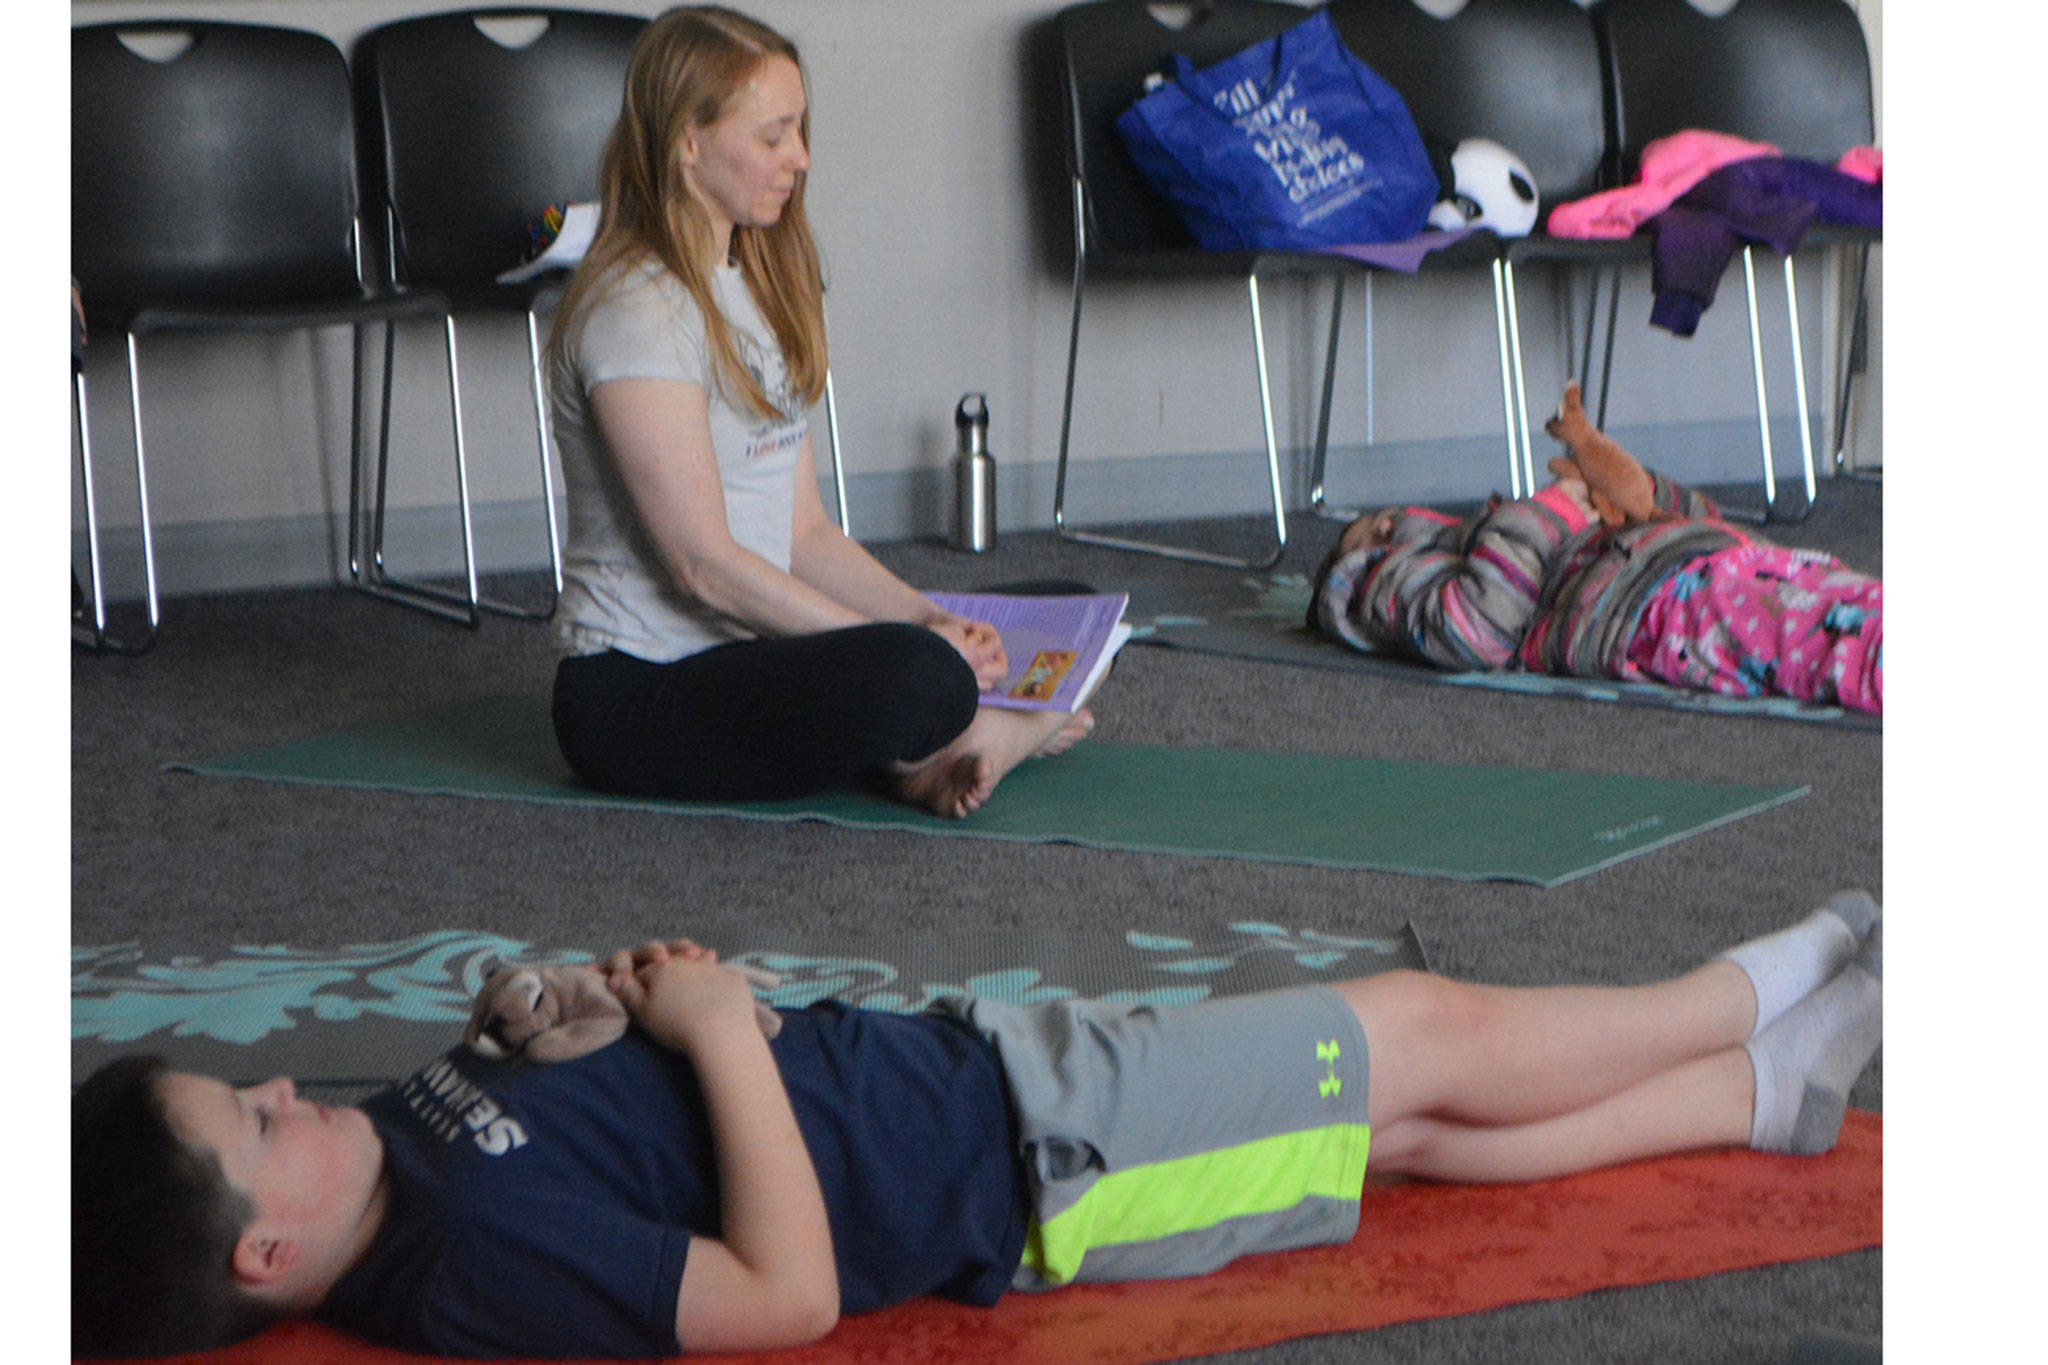 Don’t tell them it’s exercise: Free Yoga Calm class keeps kids engaged